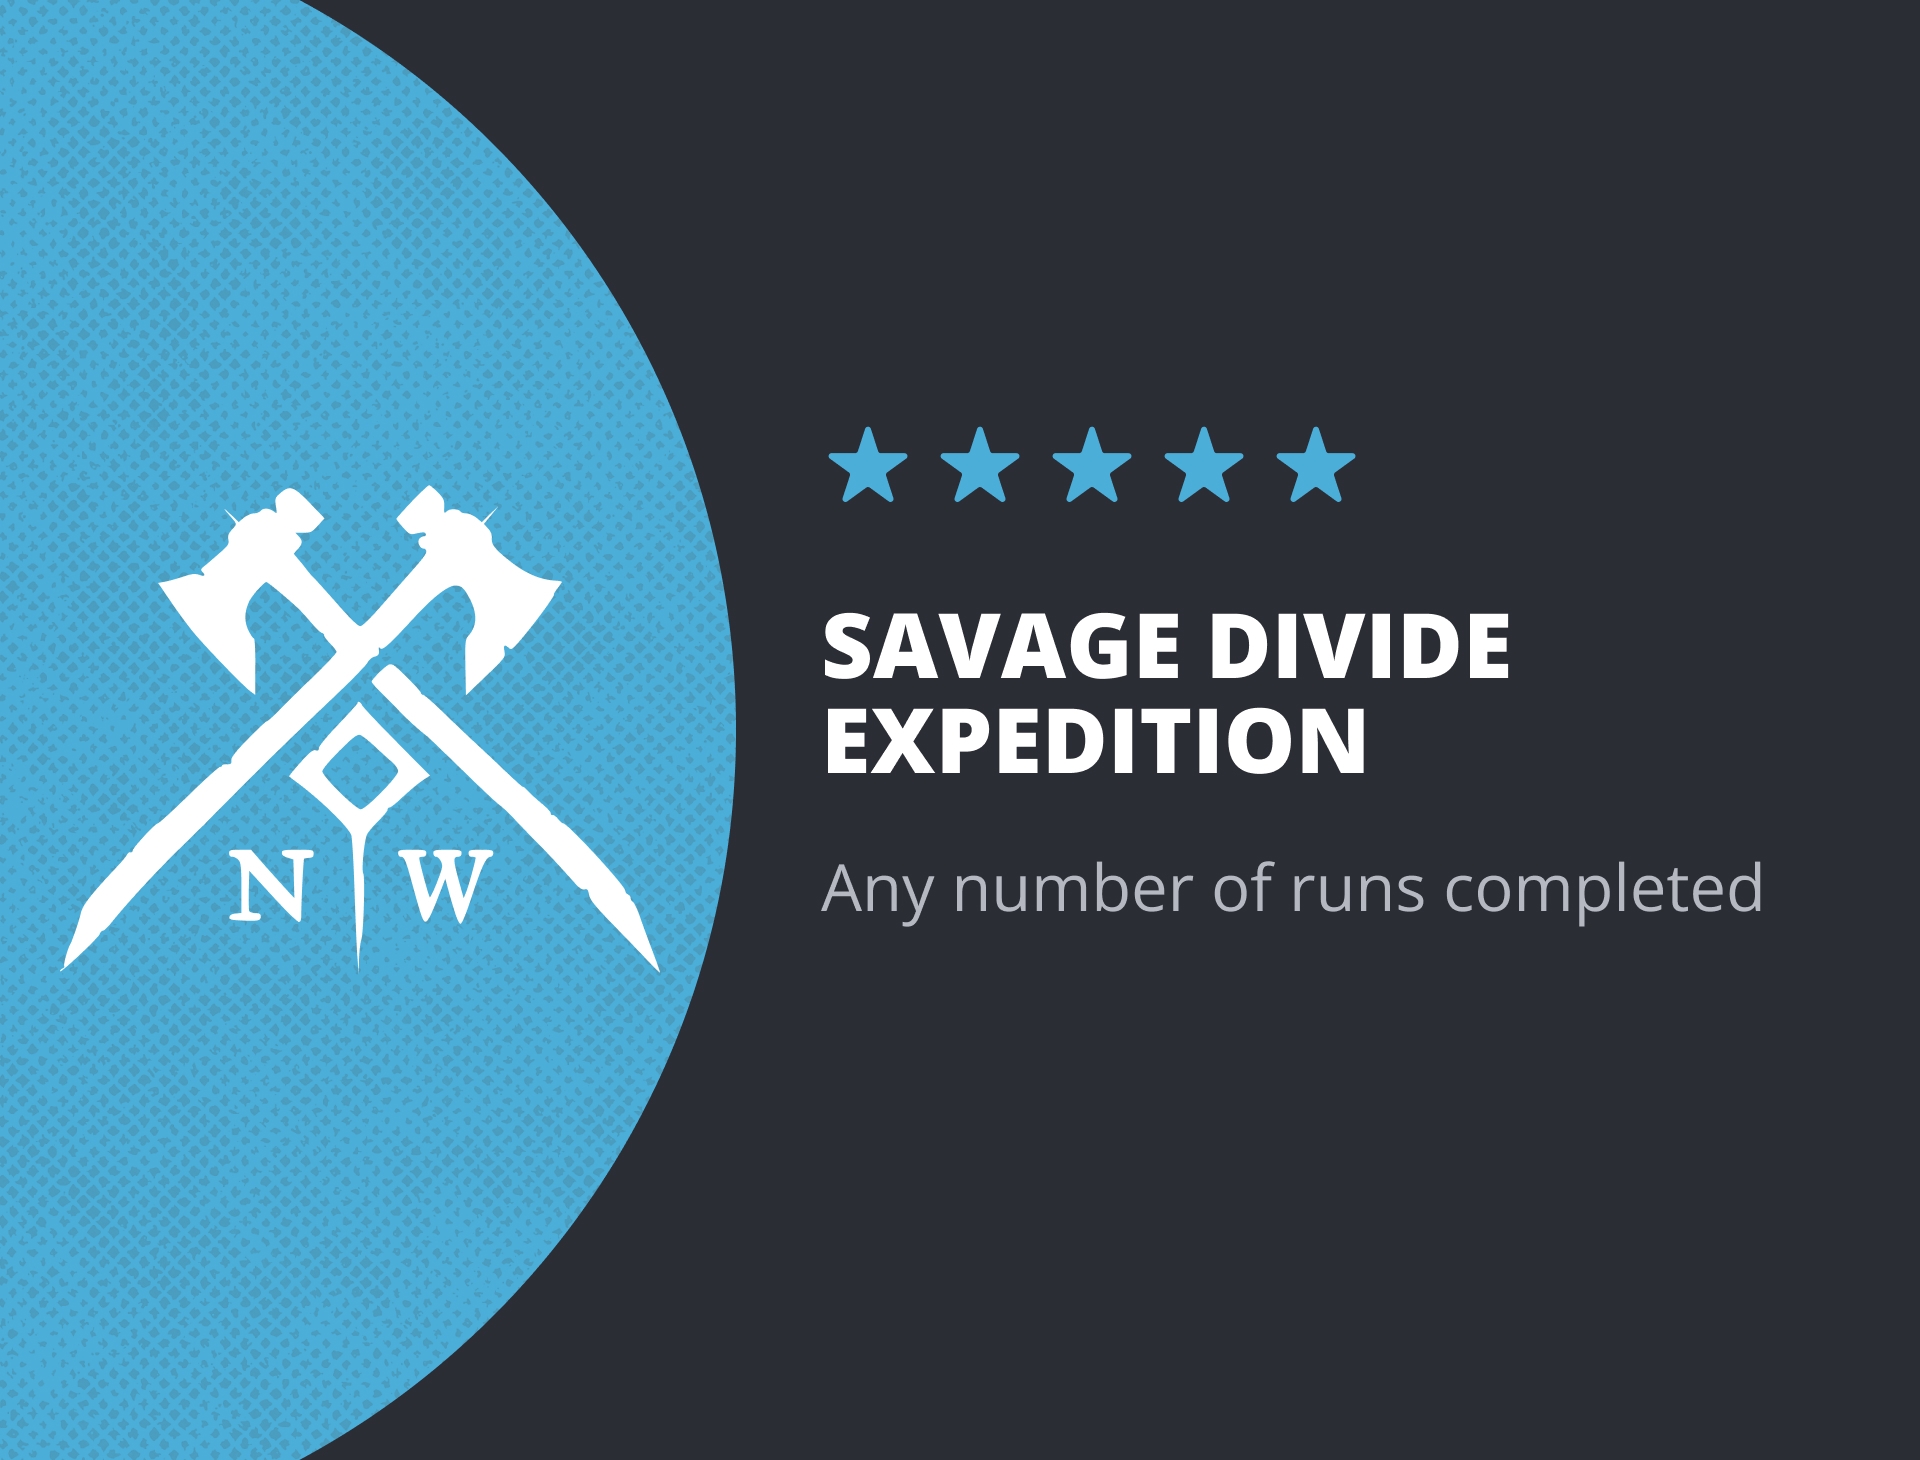 Savage Divide Expedition